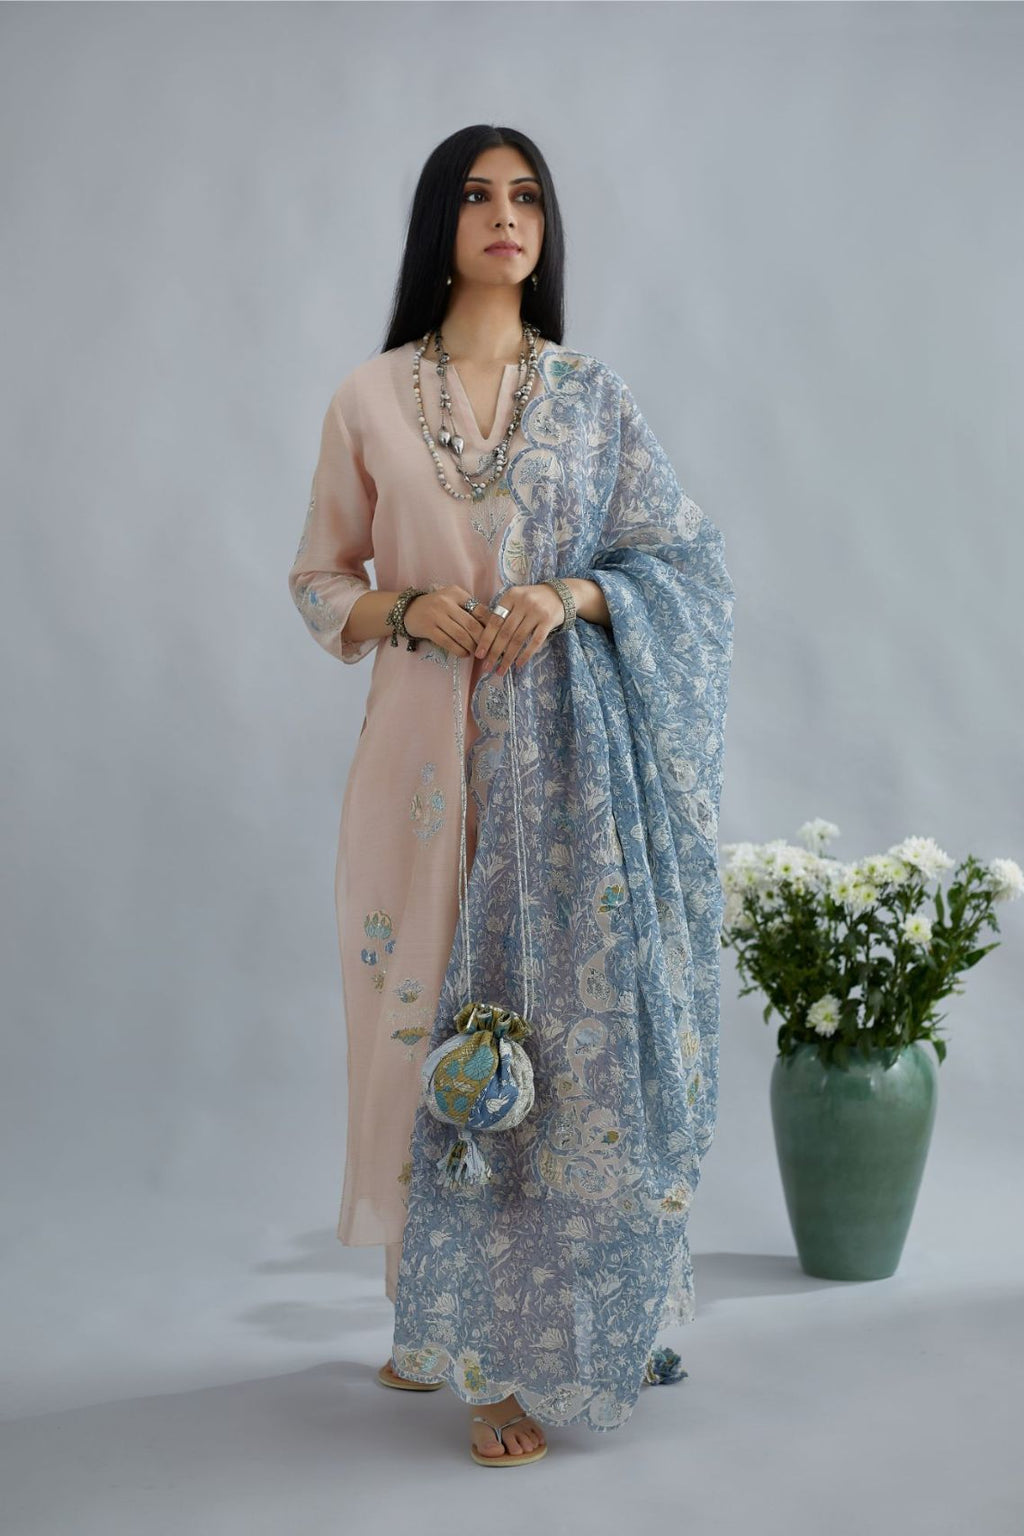 Seashell pink silk Chanderi straight kurta set with all-over floral applique, highlighted with sequin embroidery and silver zari detail.